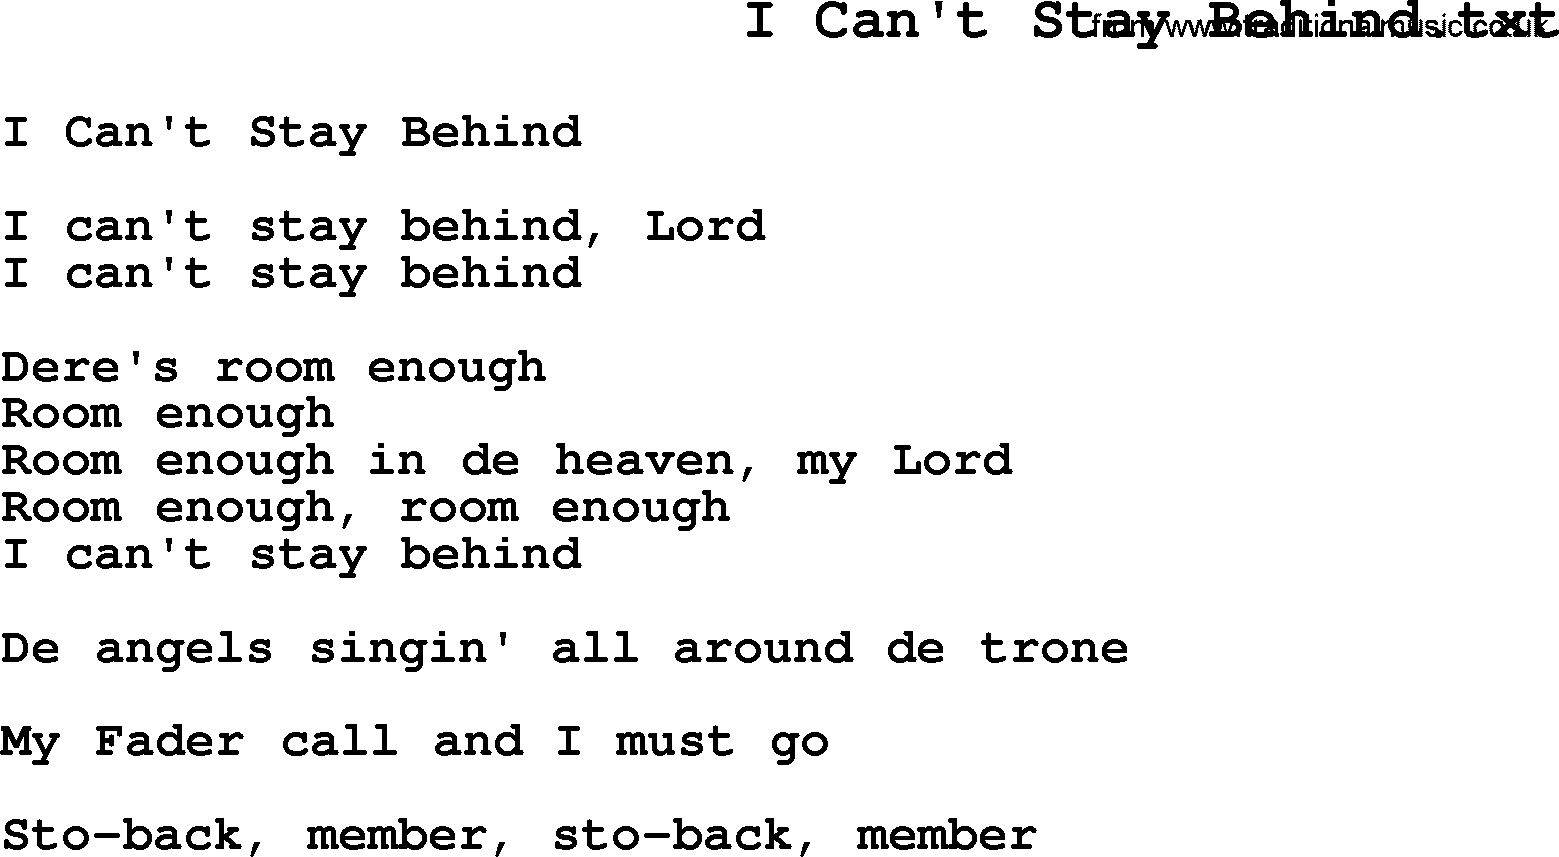 Negro Spiritual Song Lyrics for I Can't Stay Behind